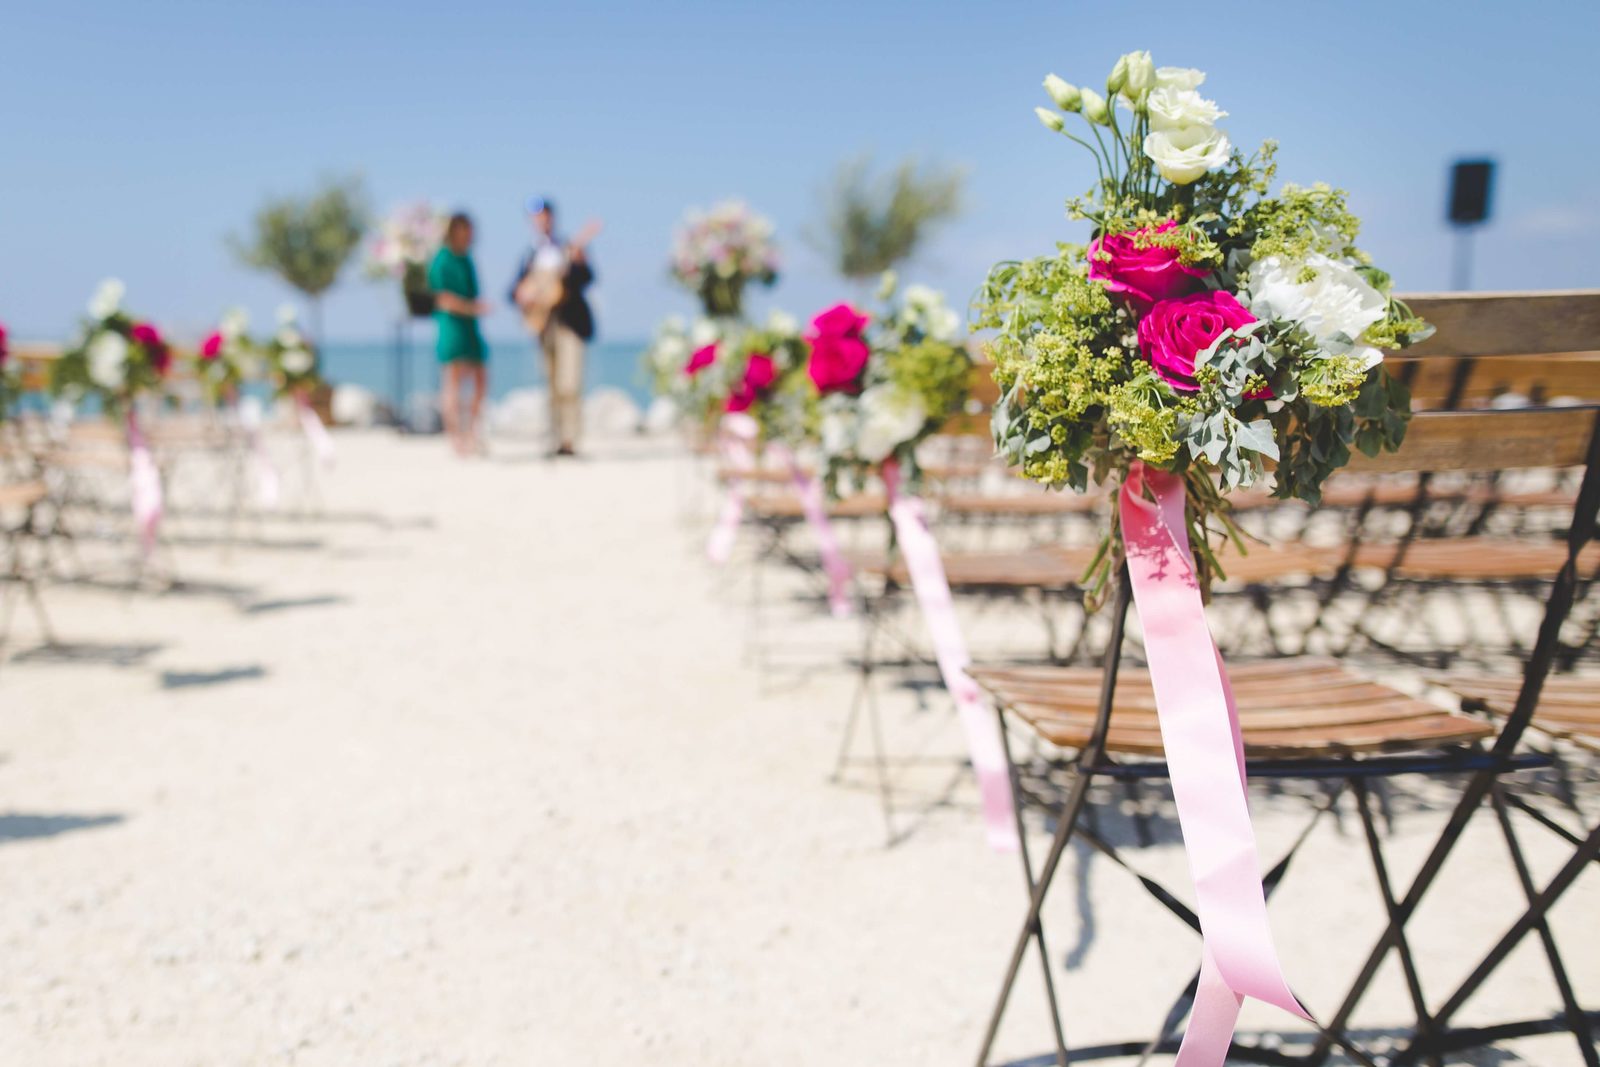 A Bonaire wedding; who doesn't want to marry at a great place like this? Declare your love at the beach and dance with your partner!